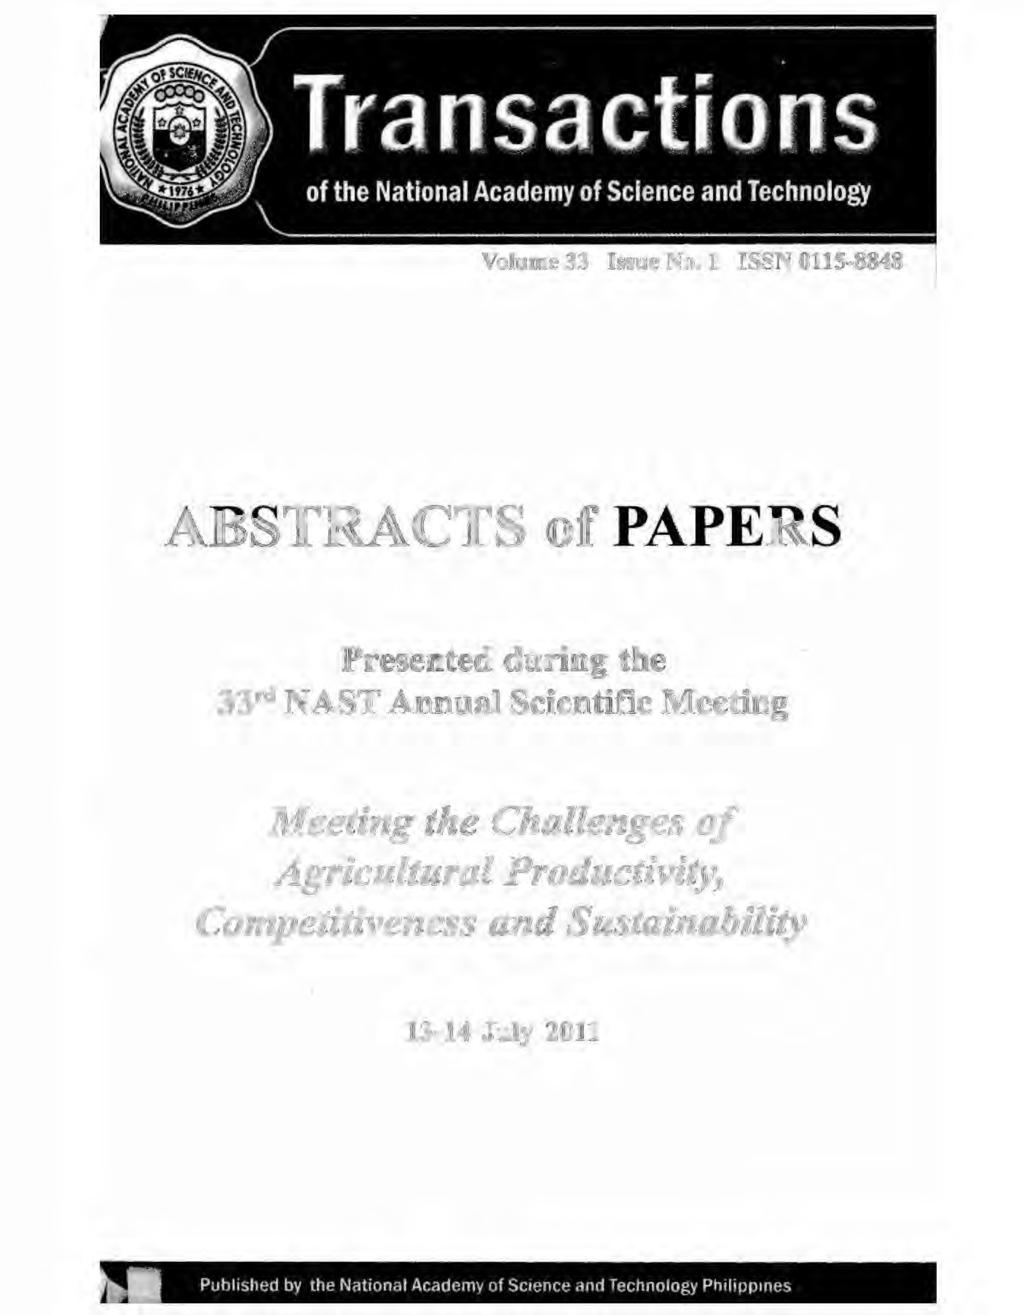 ABSTRACTS of PAPERS Presented during the 33rd NAST Annual